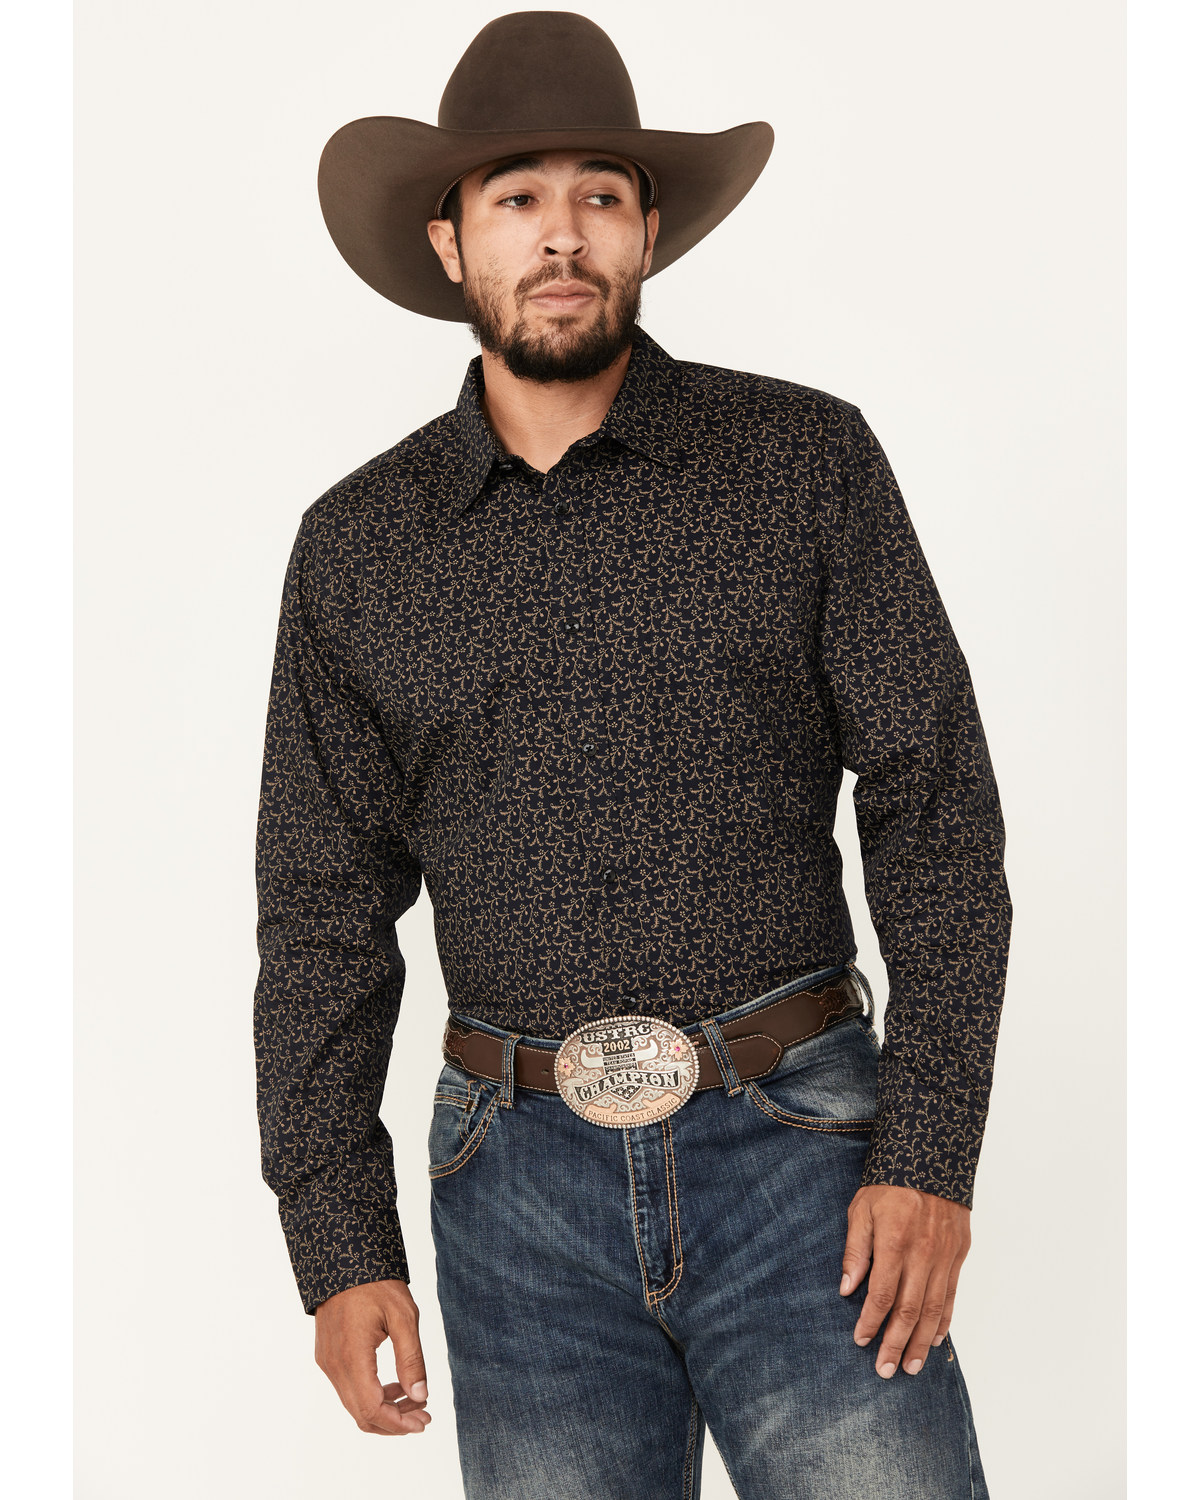 Gibson Trading Co Men's Ditsy Floral Print Long Sleeve Button-Down Western Shirt